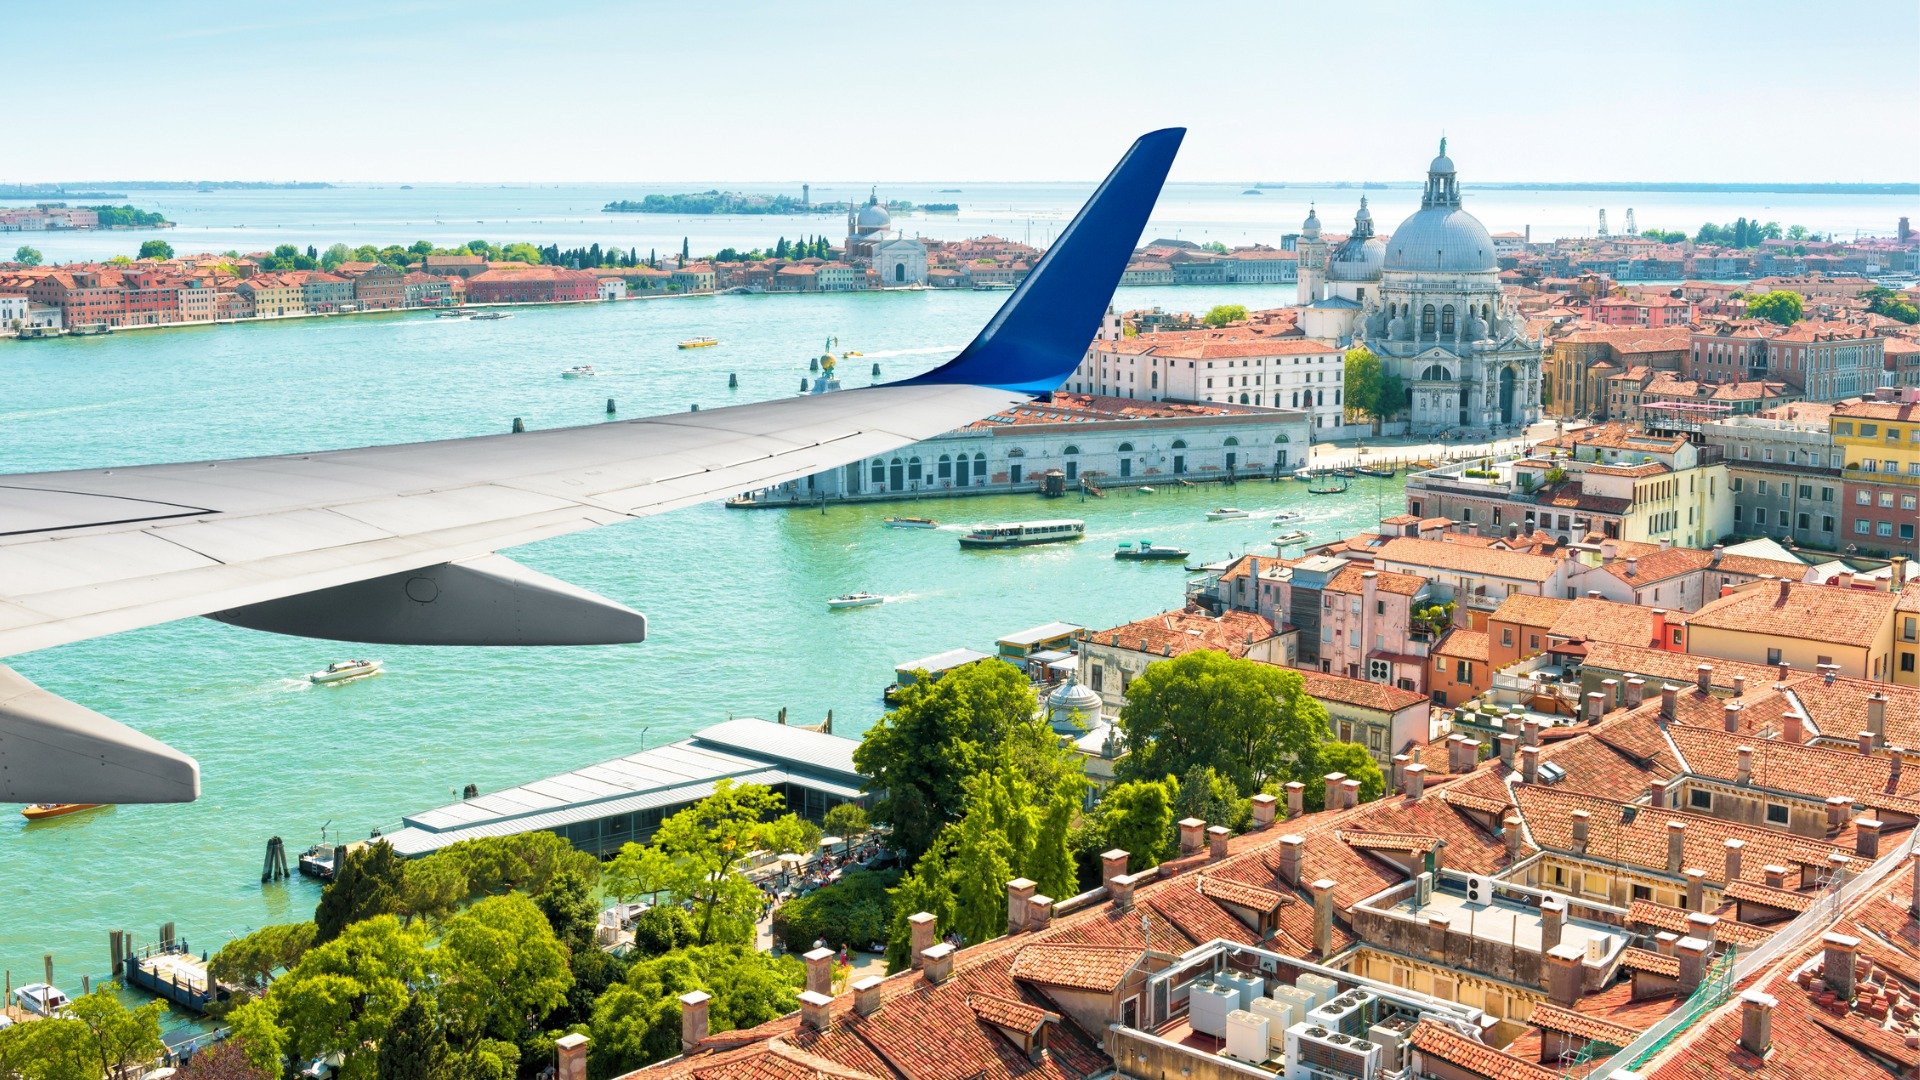 This image shows the wing of a plane as it flies over Venice, a city you must include in your itinerary when planning a trip to Italy and Greece. 